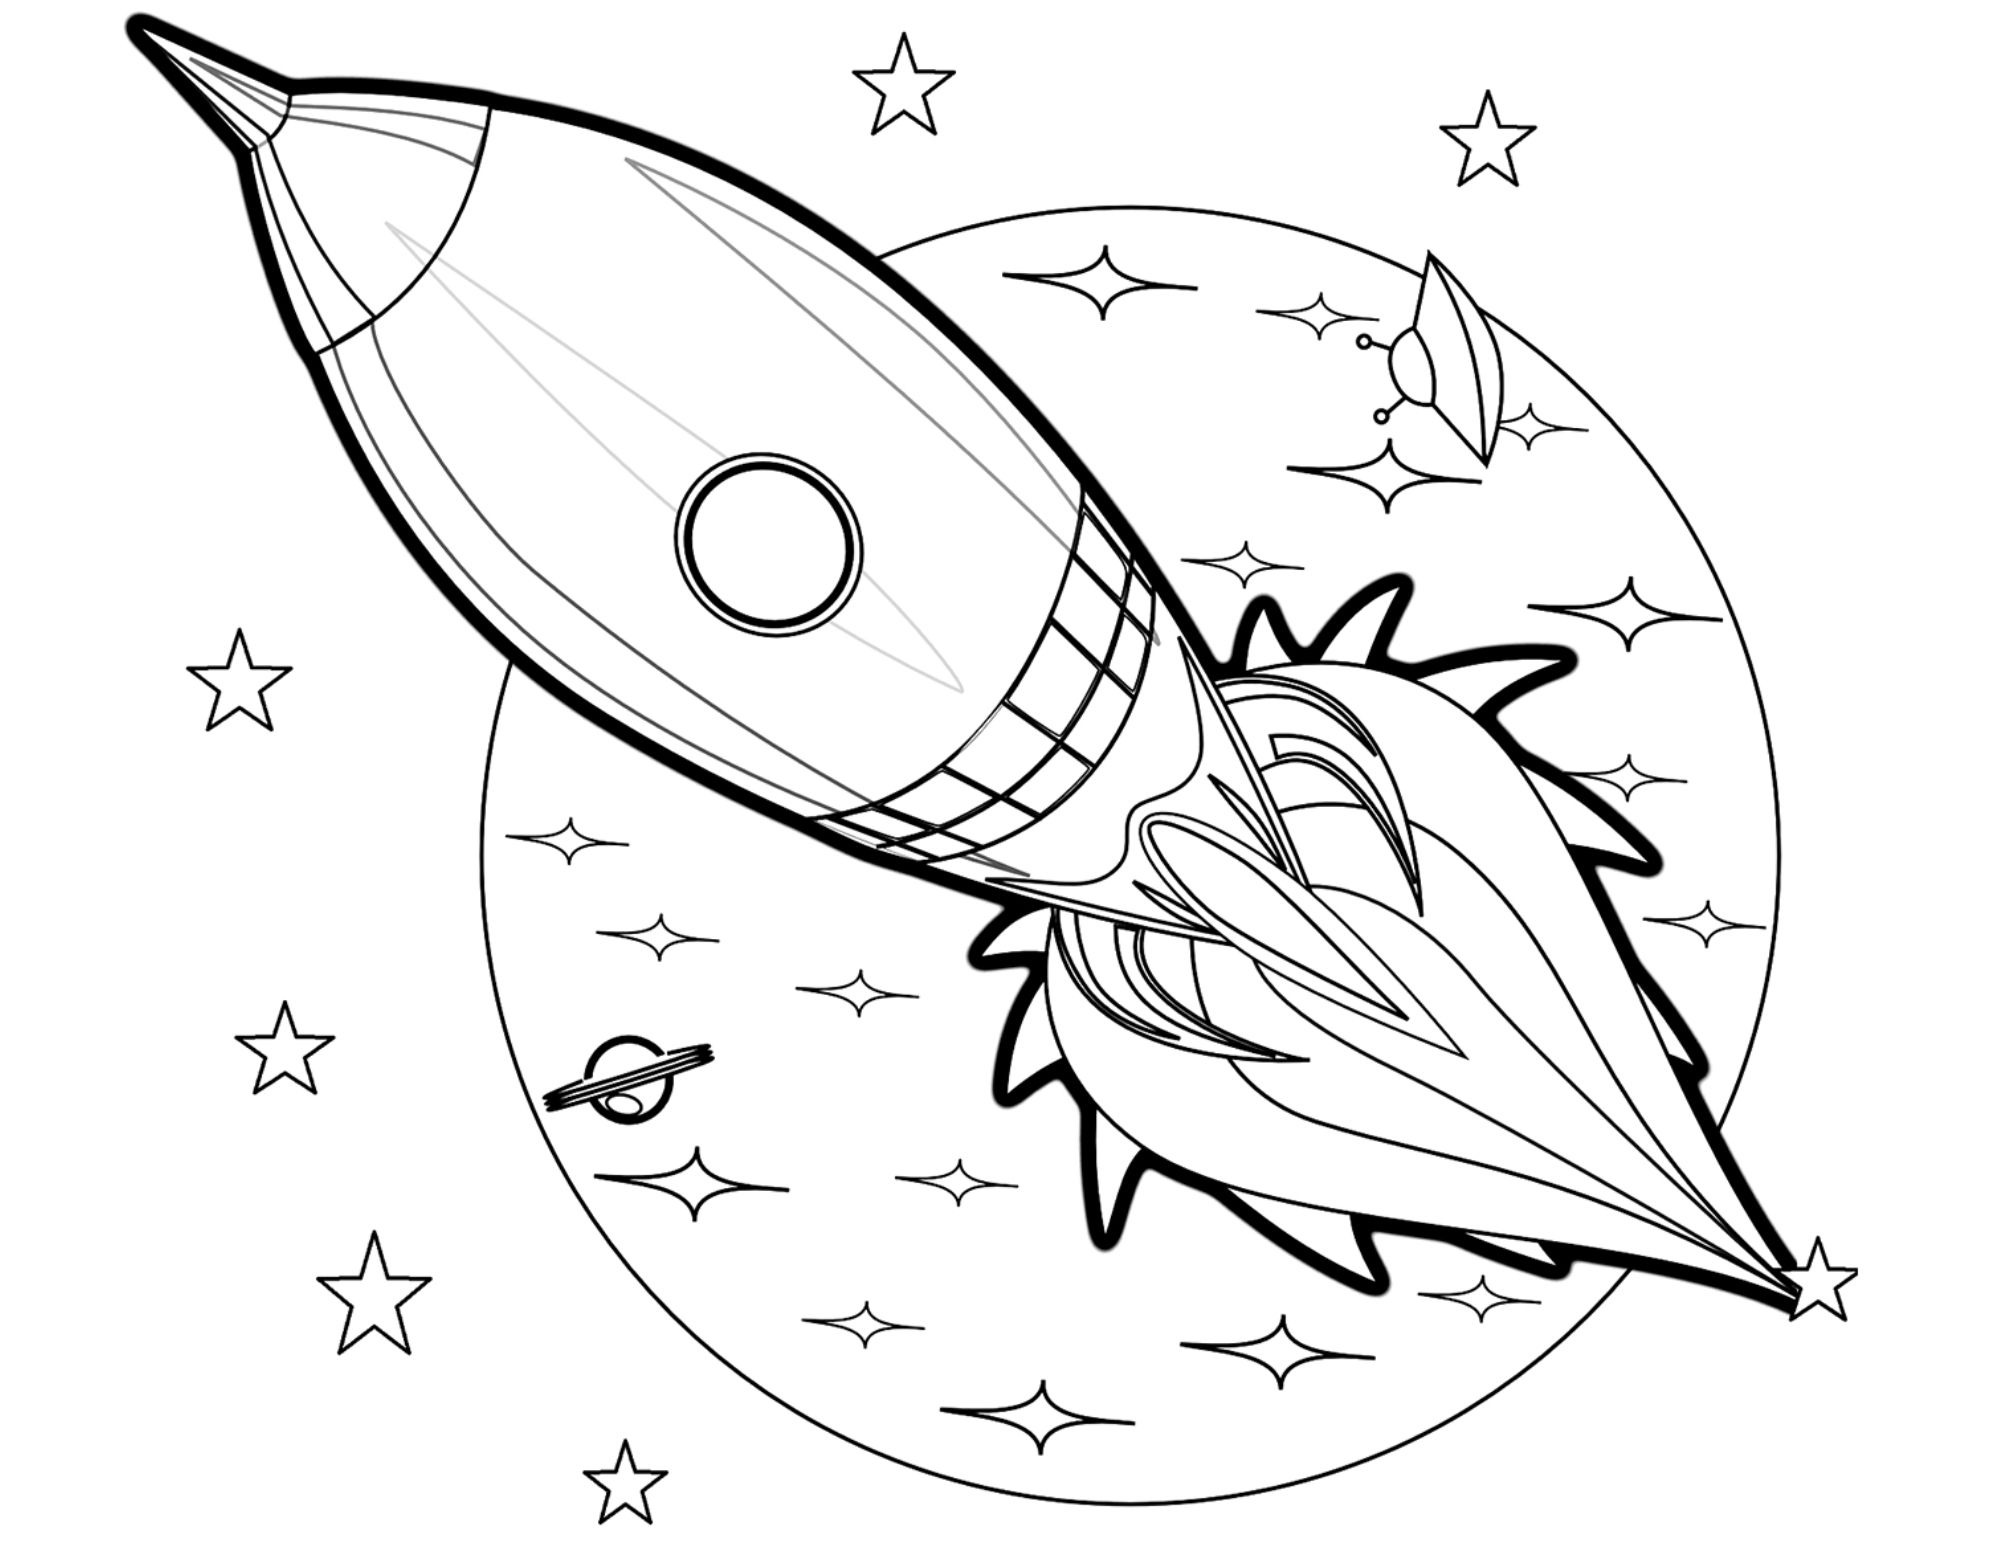 Printable Rocket Coloring Pages For Kids. Add some color to that Rocket!